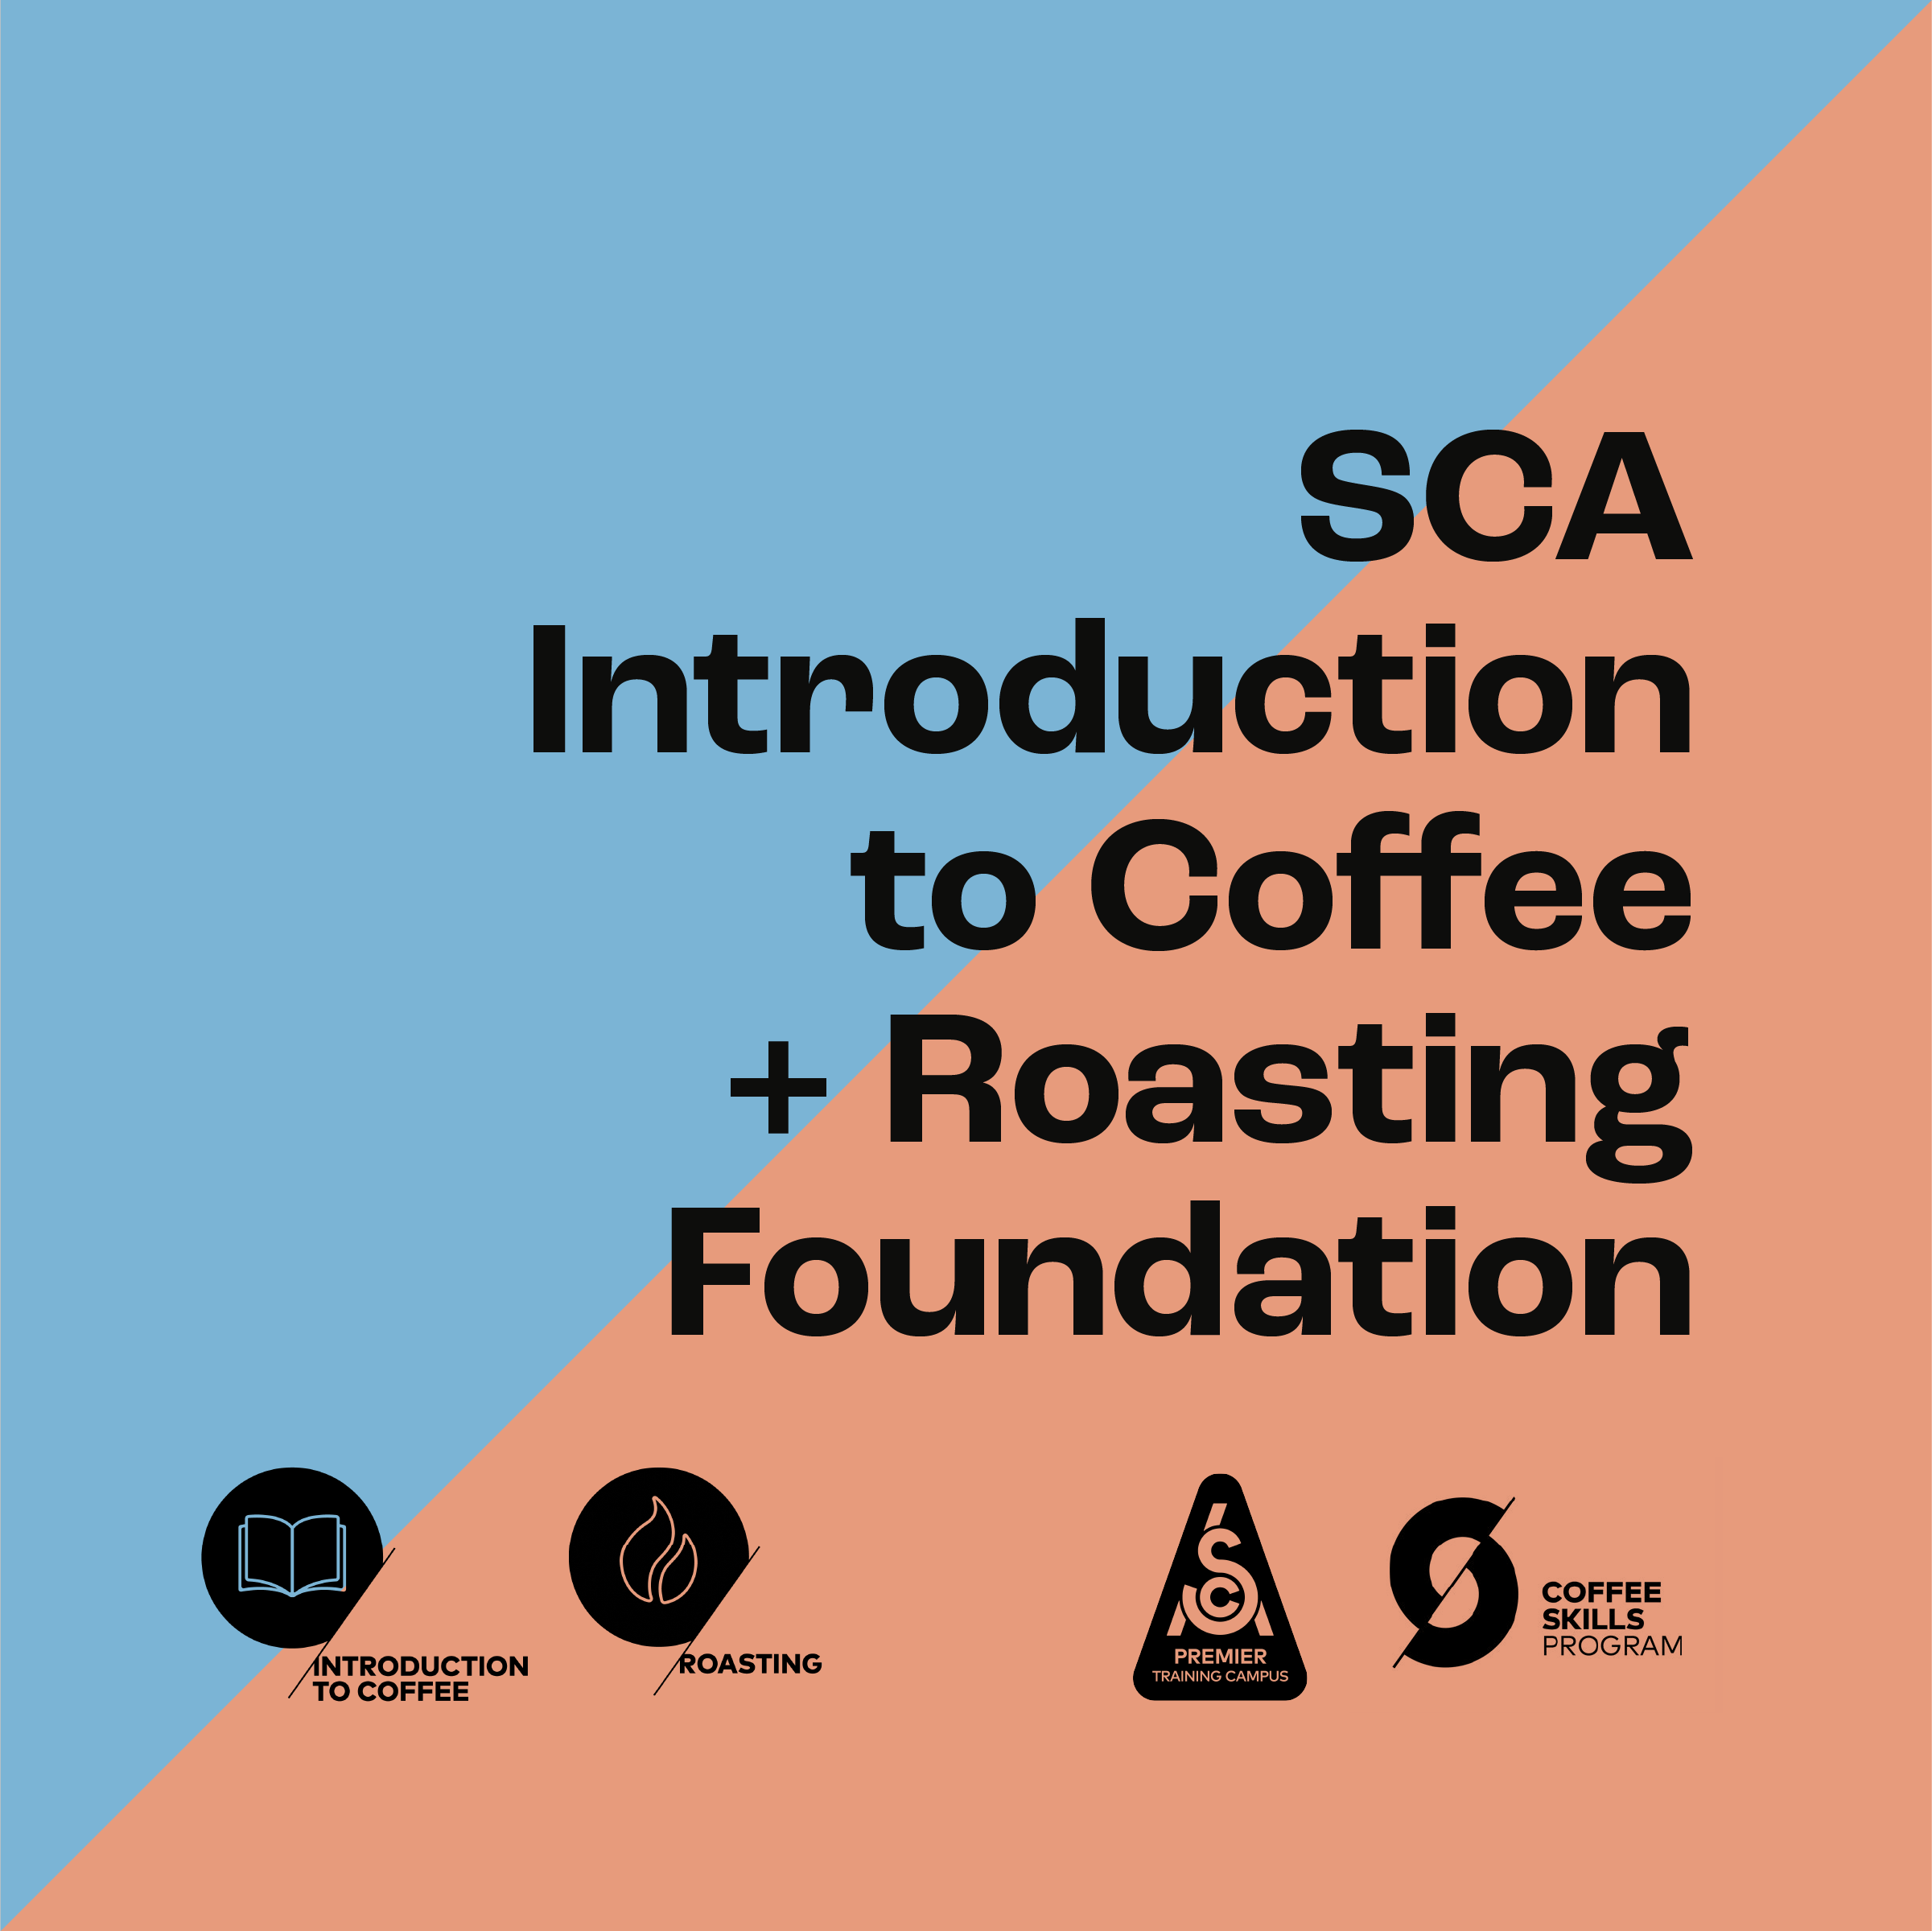 SCA Introduction to Coffee + Roasting Foundation